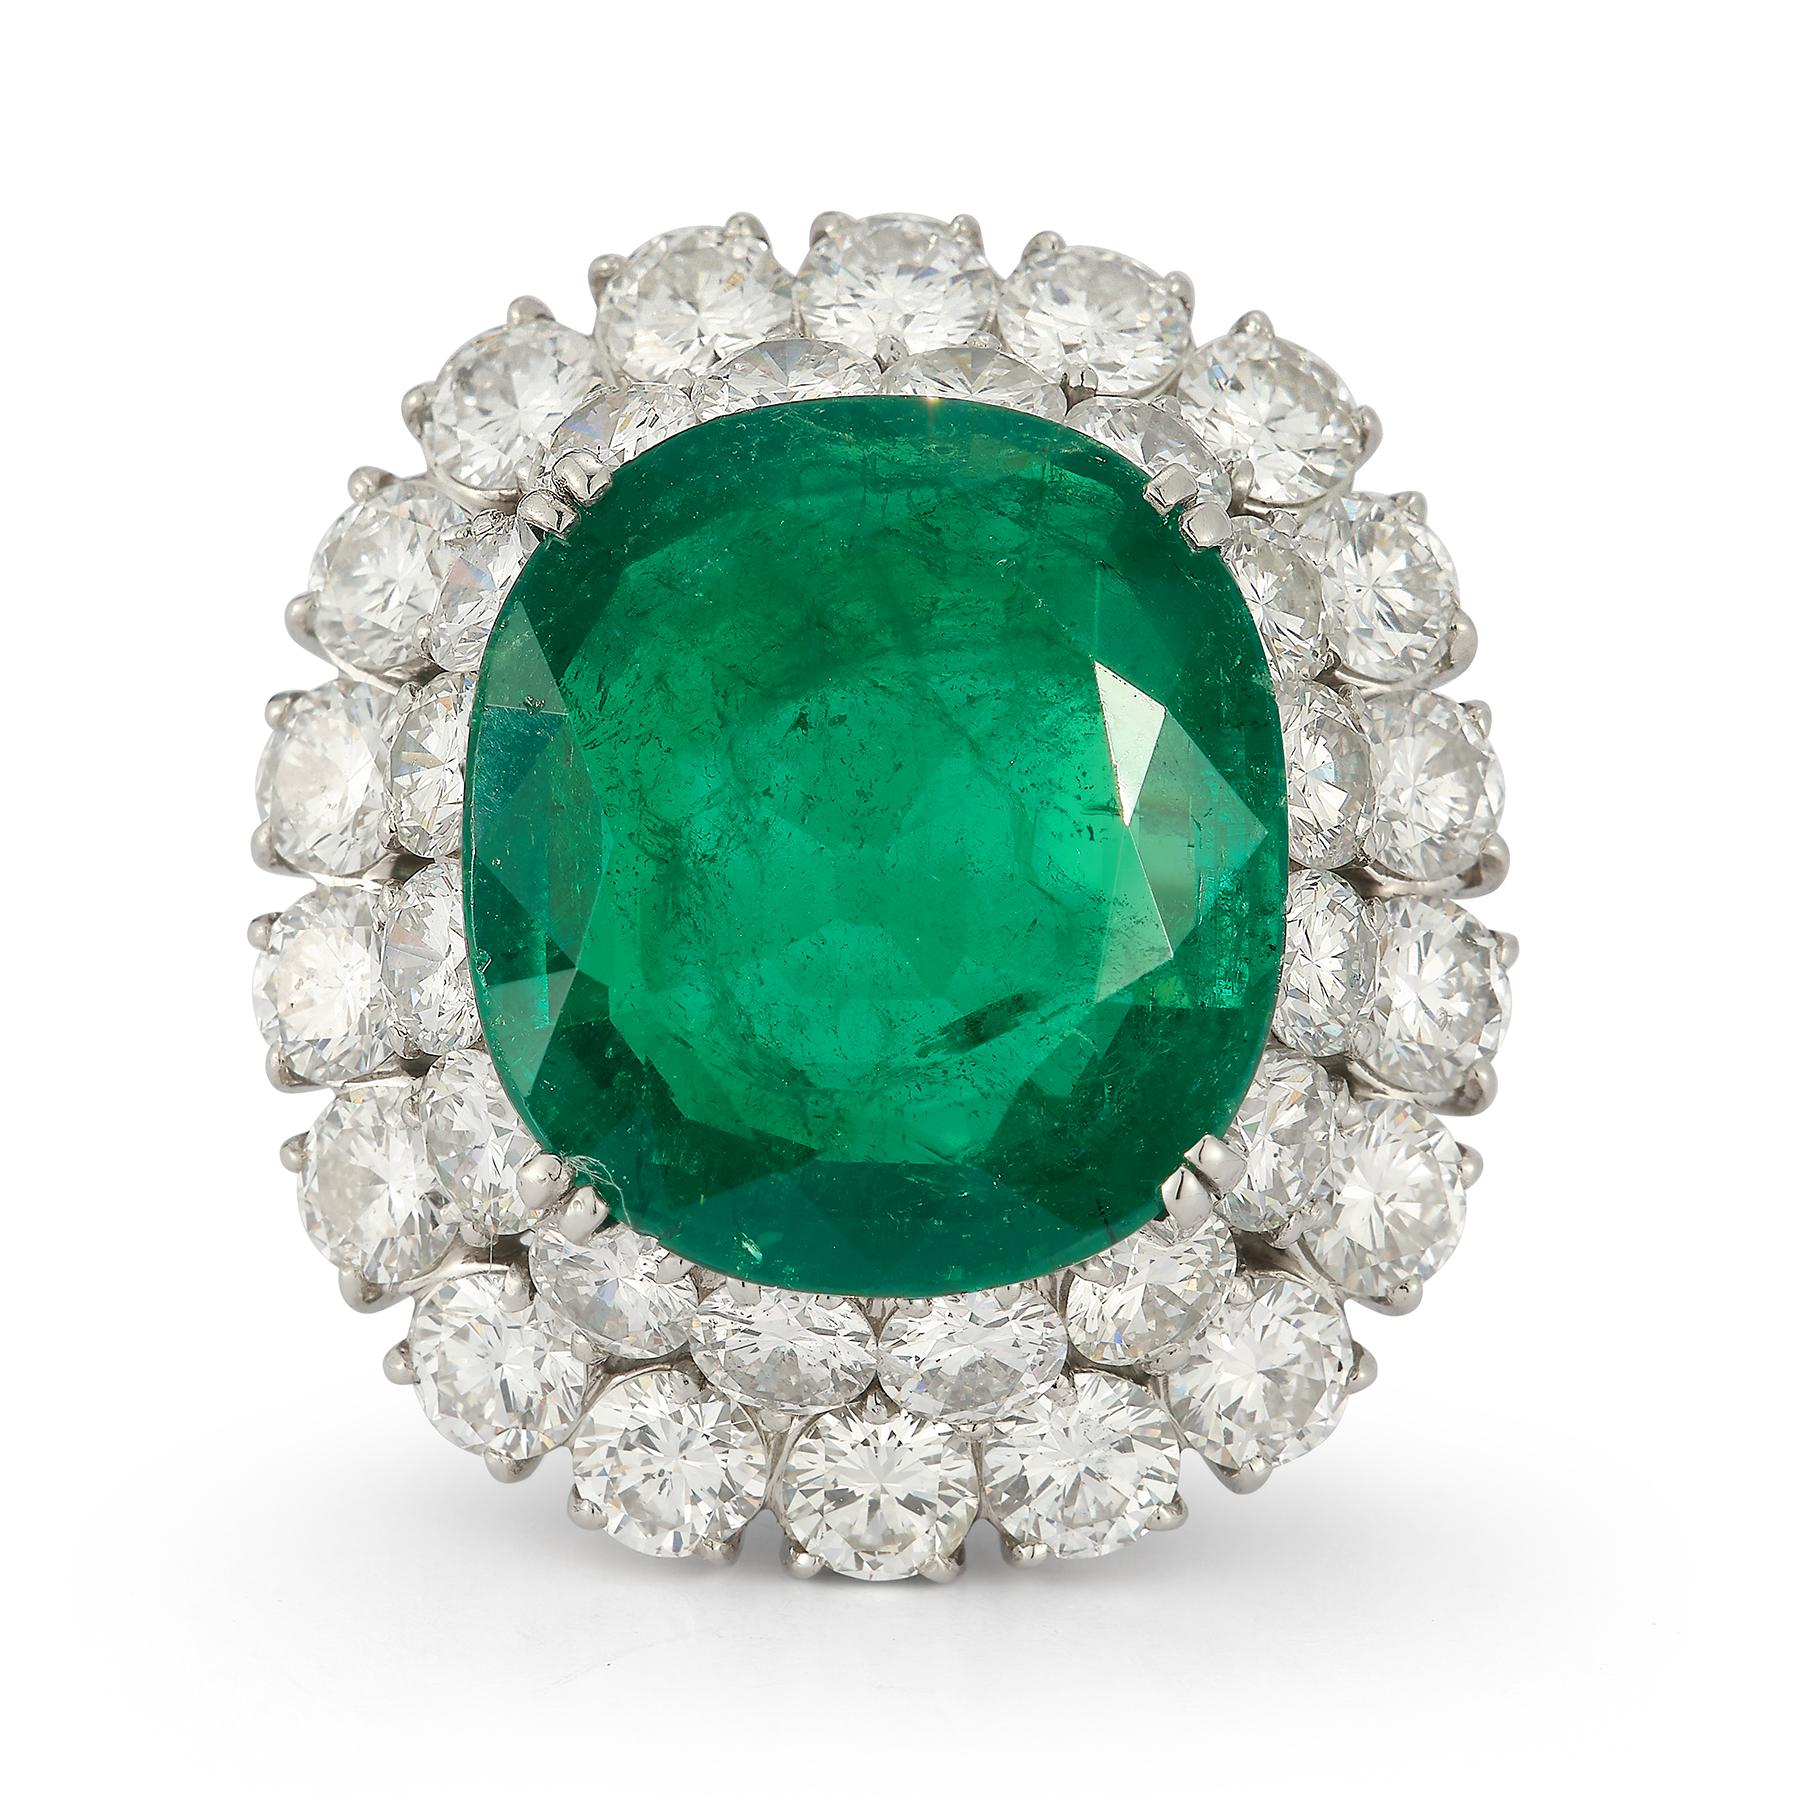 Fine 10.64 carat Certified Colombian Emerald Ring By Bulgari

Oval-shaped emerald set with round diamonds in platinum, signed BVLGARI

SSEF Certification: Colombian, moderate amount of oil

Approximate total diamond weight of 7.00 carats

US ring